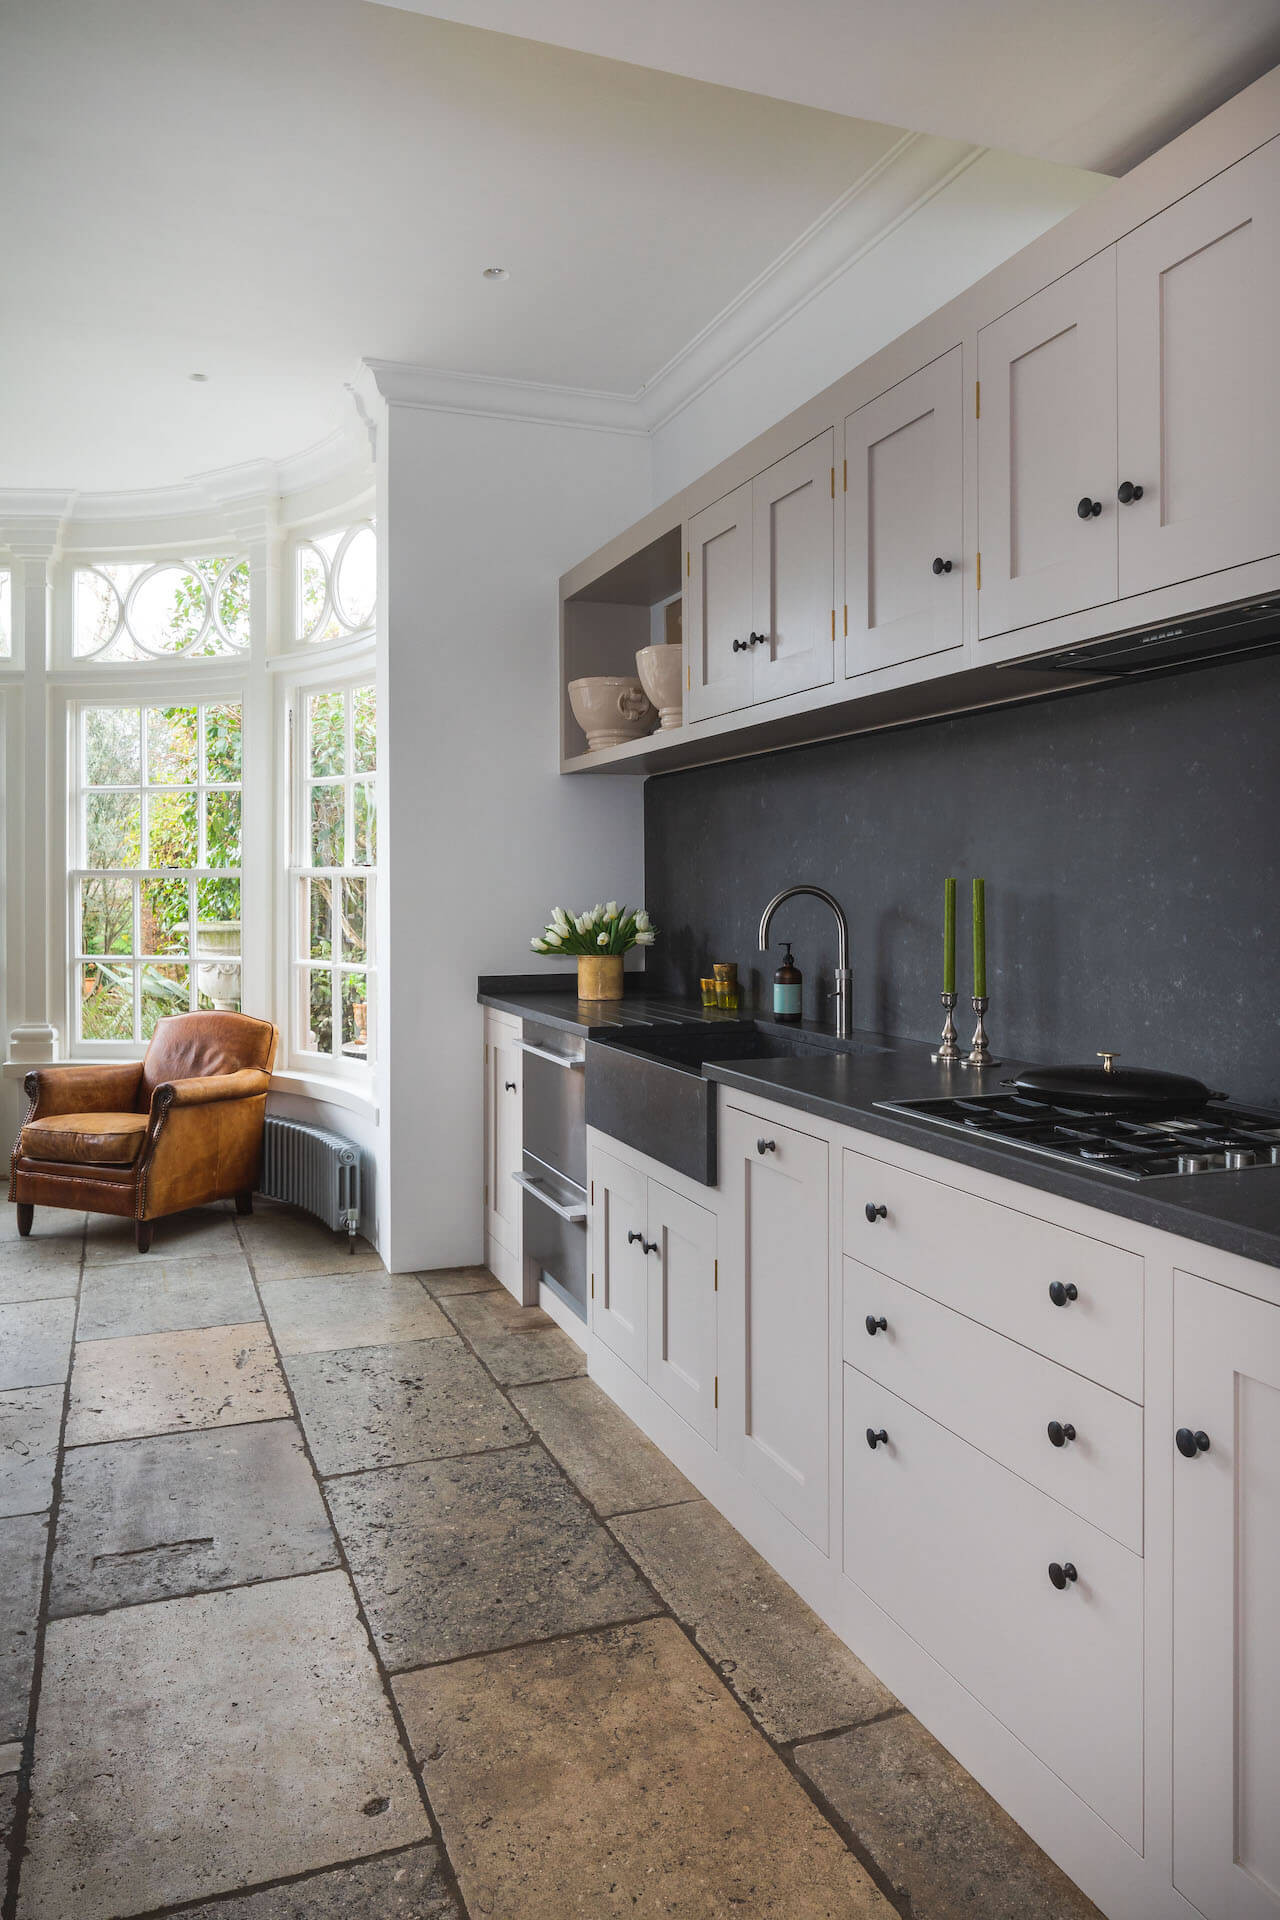 75 Beautiful Kitchen with Black Worktops Ideas and Designs - March 2023 |  Houzz UK